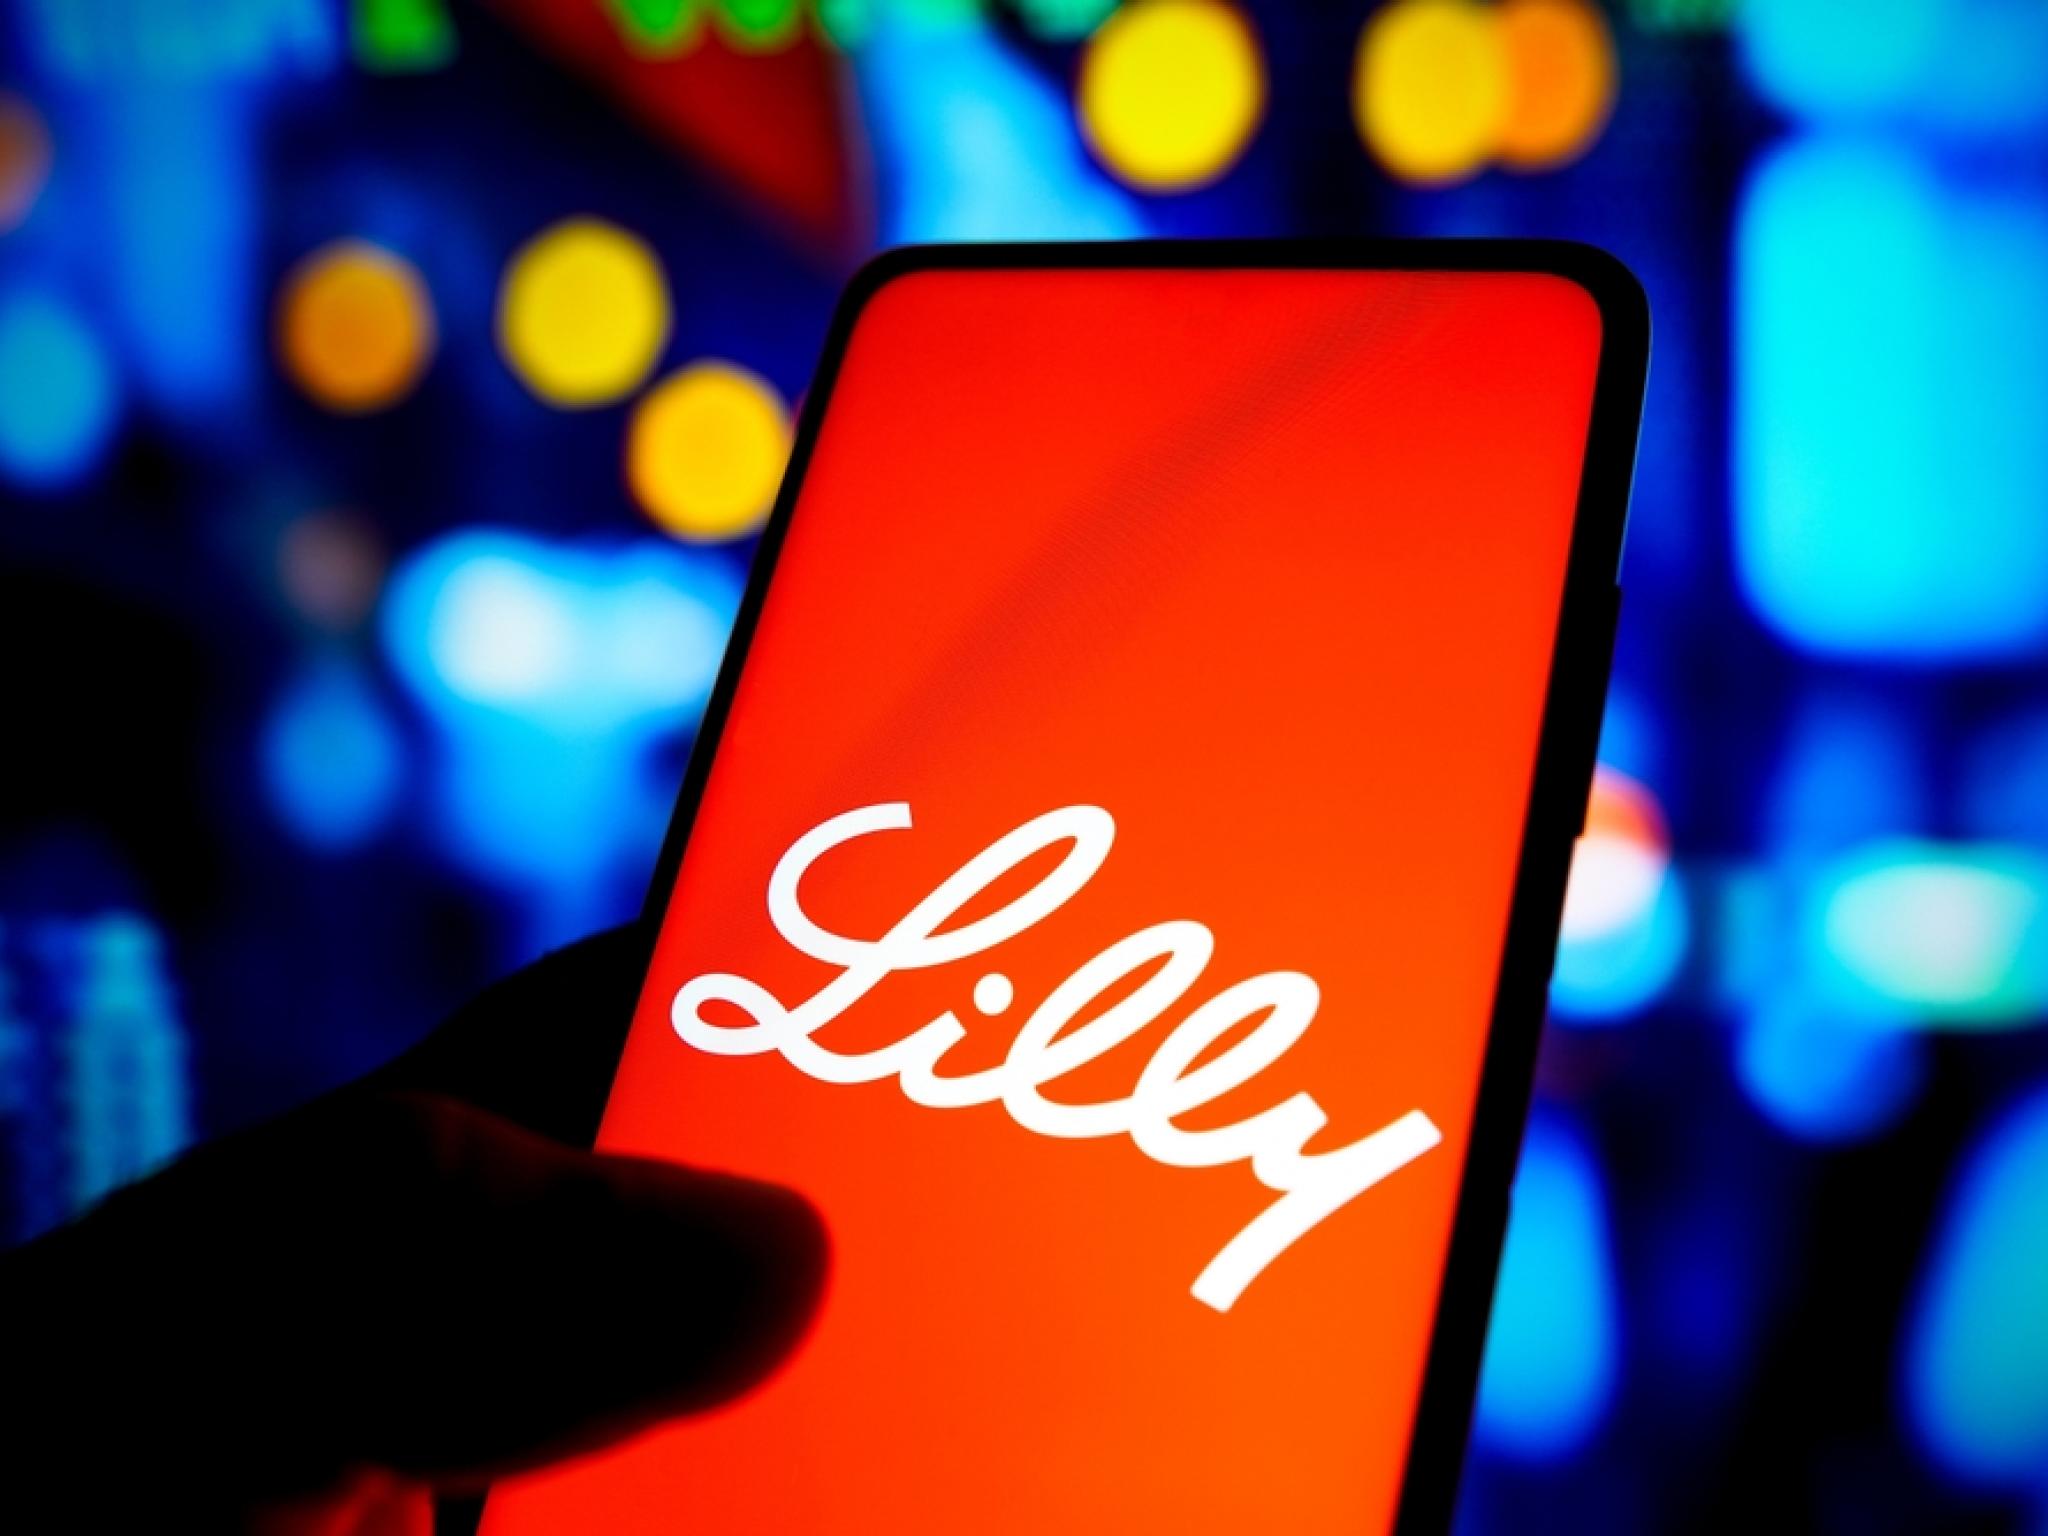  whats-going-on-with-eli-lilly-shares-monday 